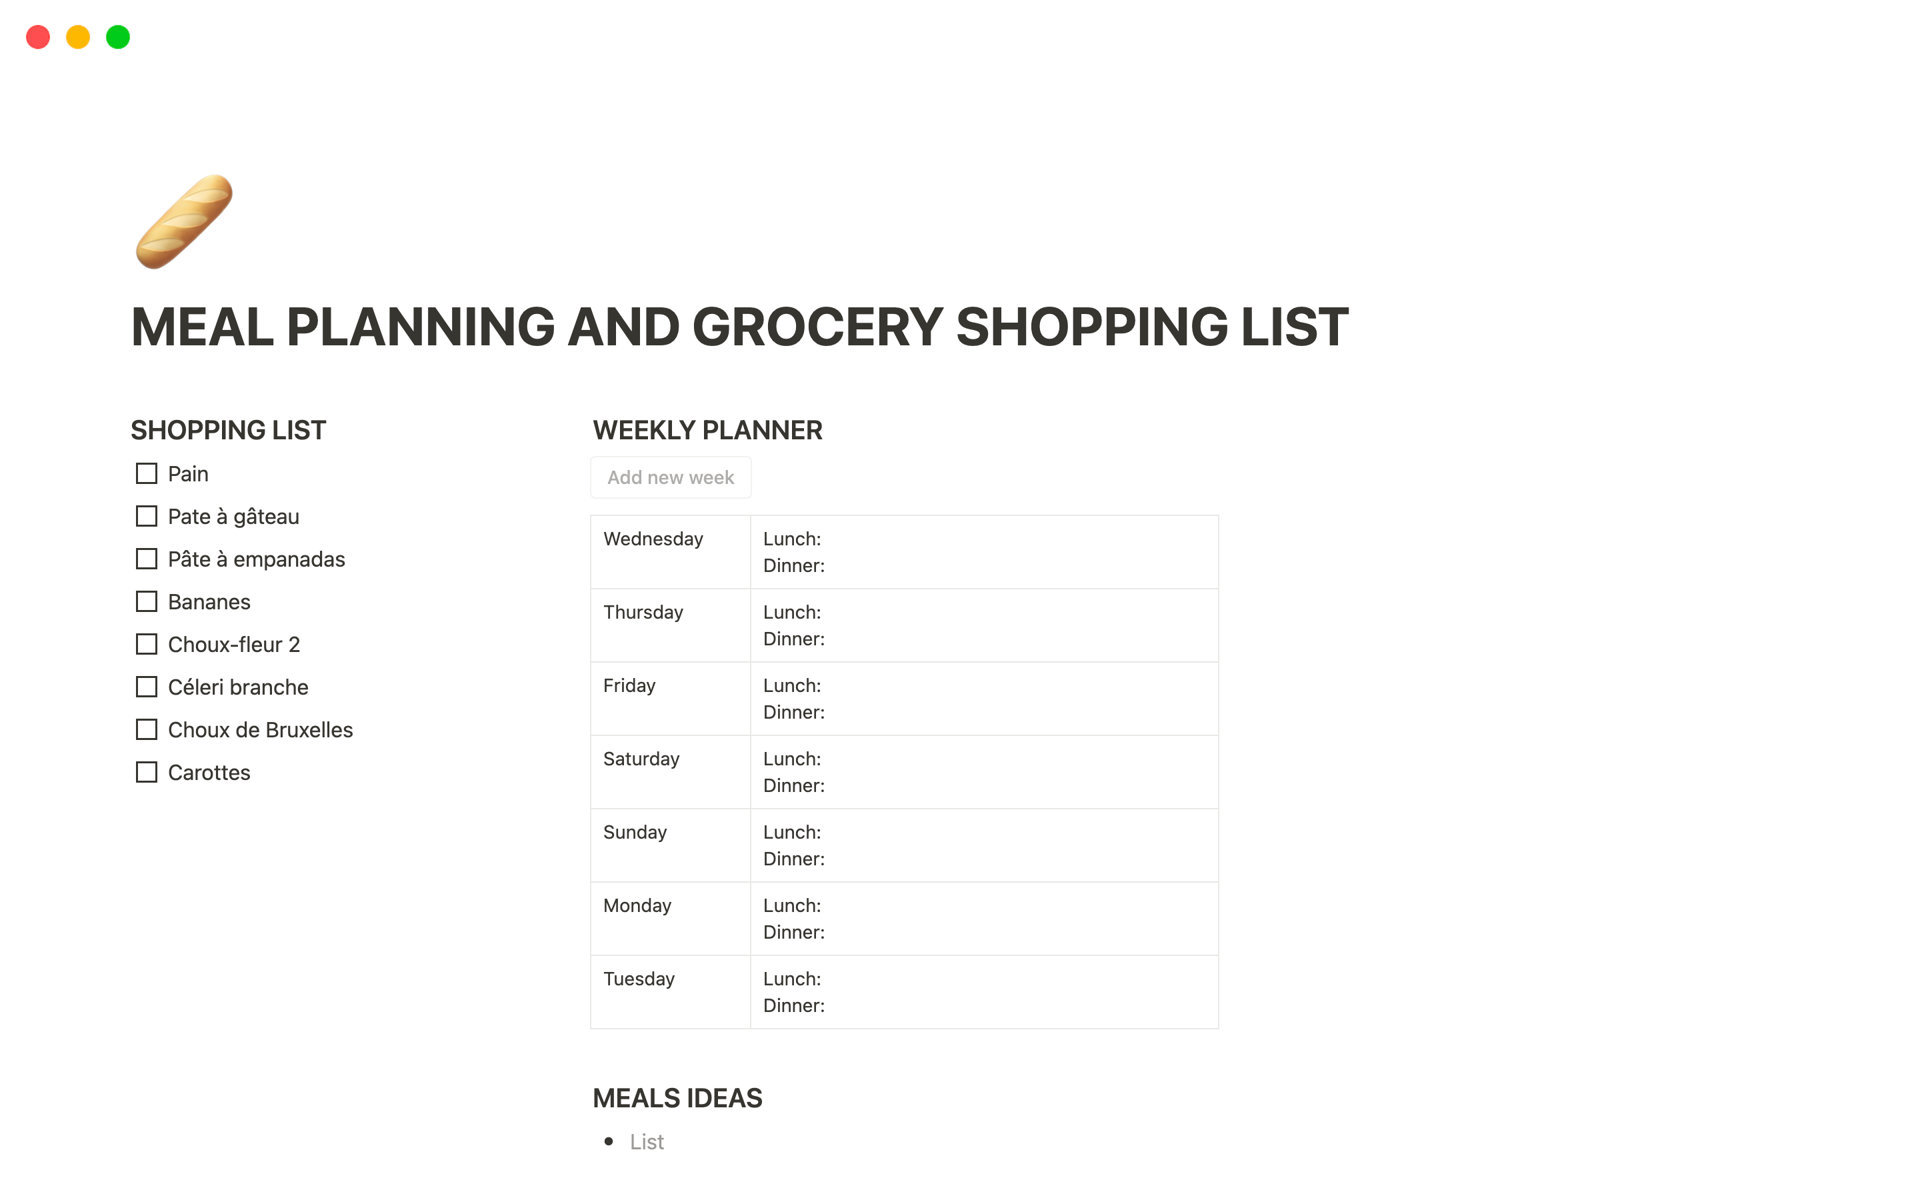 Meal planning and grocery shopping listのテンプレートのプレビュー